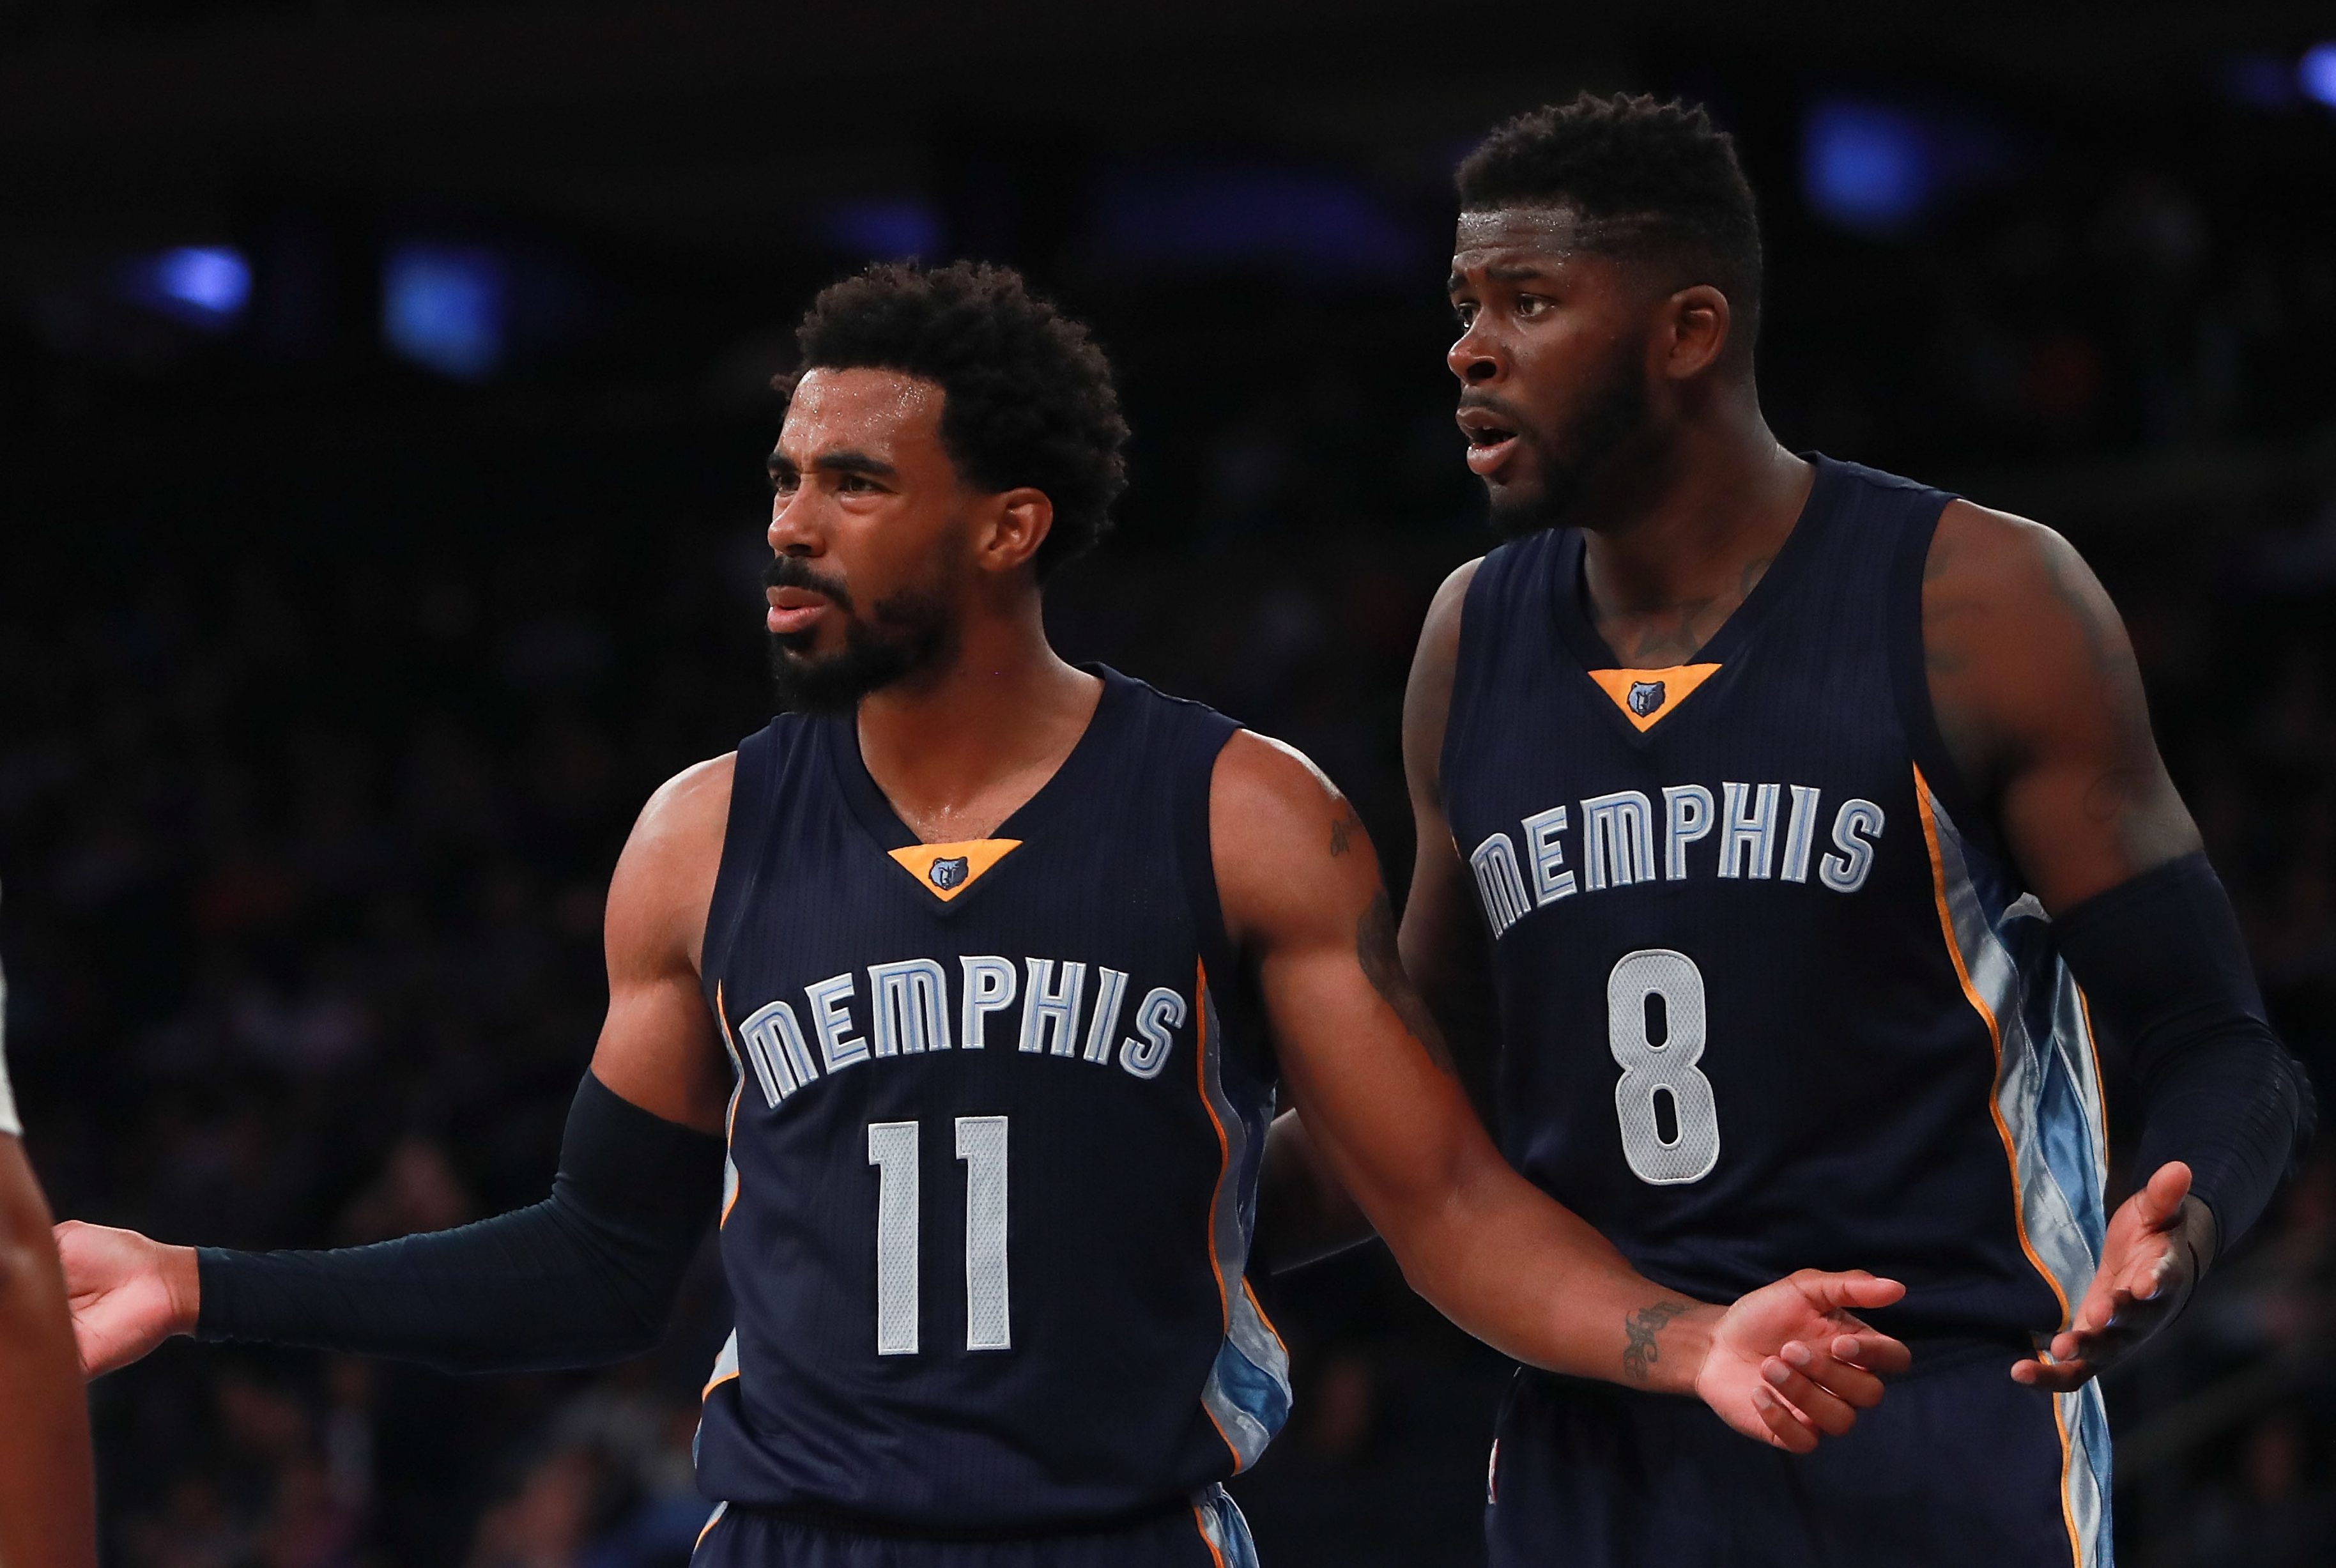 Grizzlies vs. Clippers Live Stream How to Watch Online